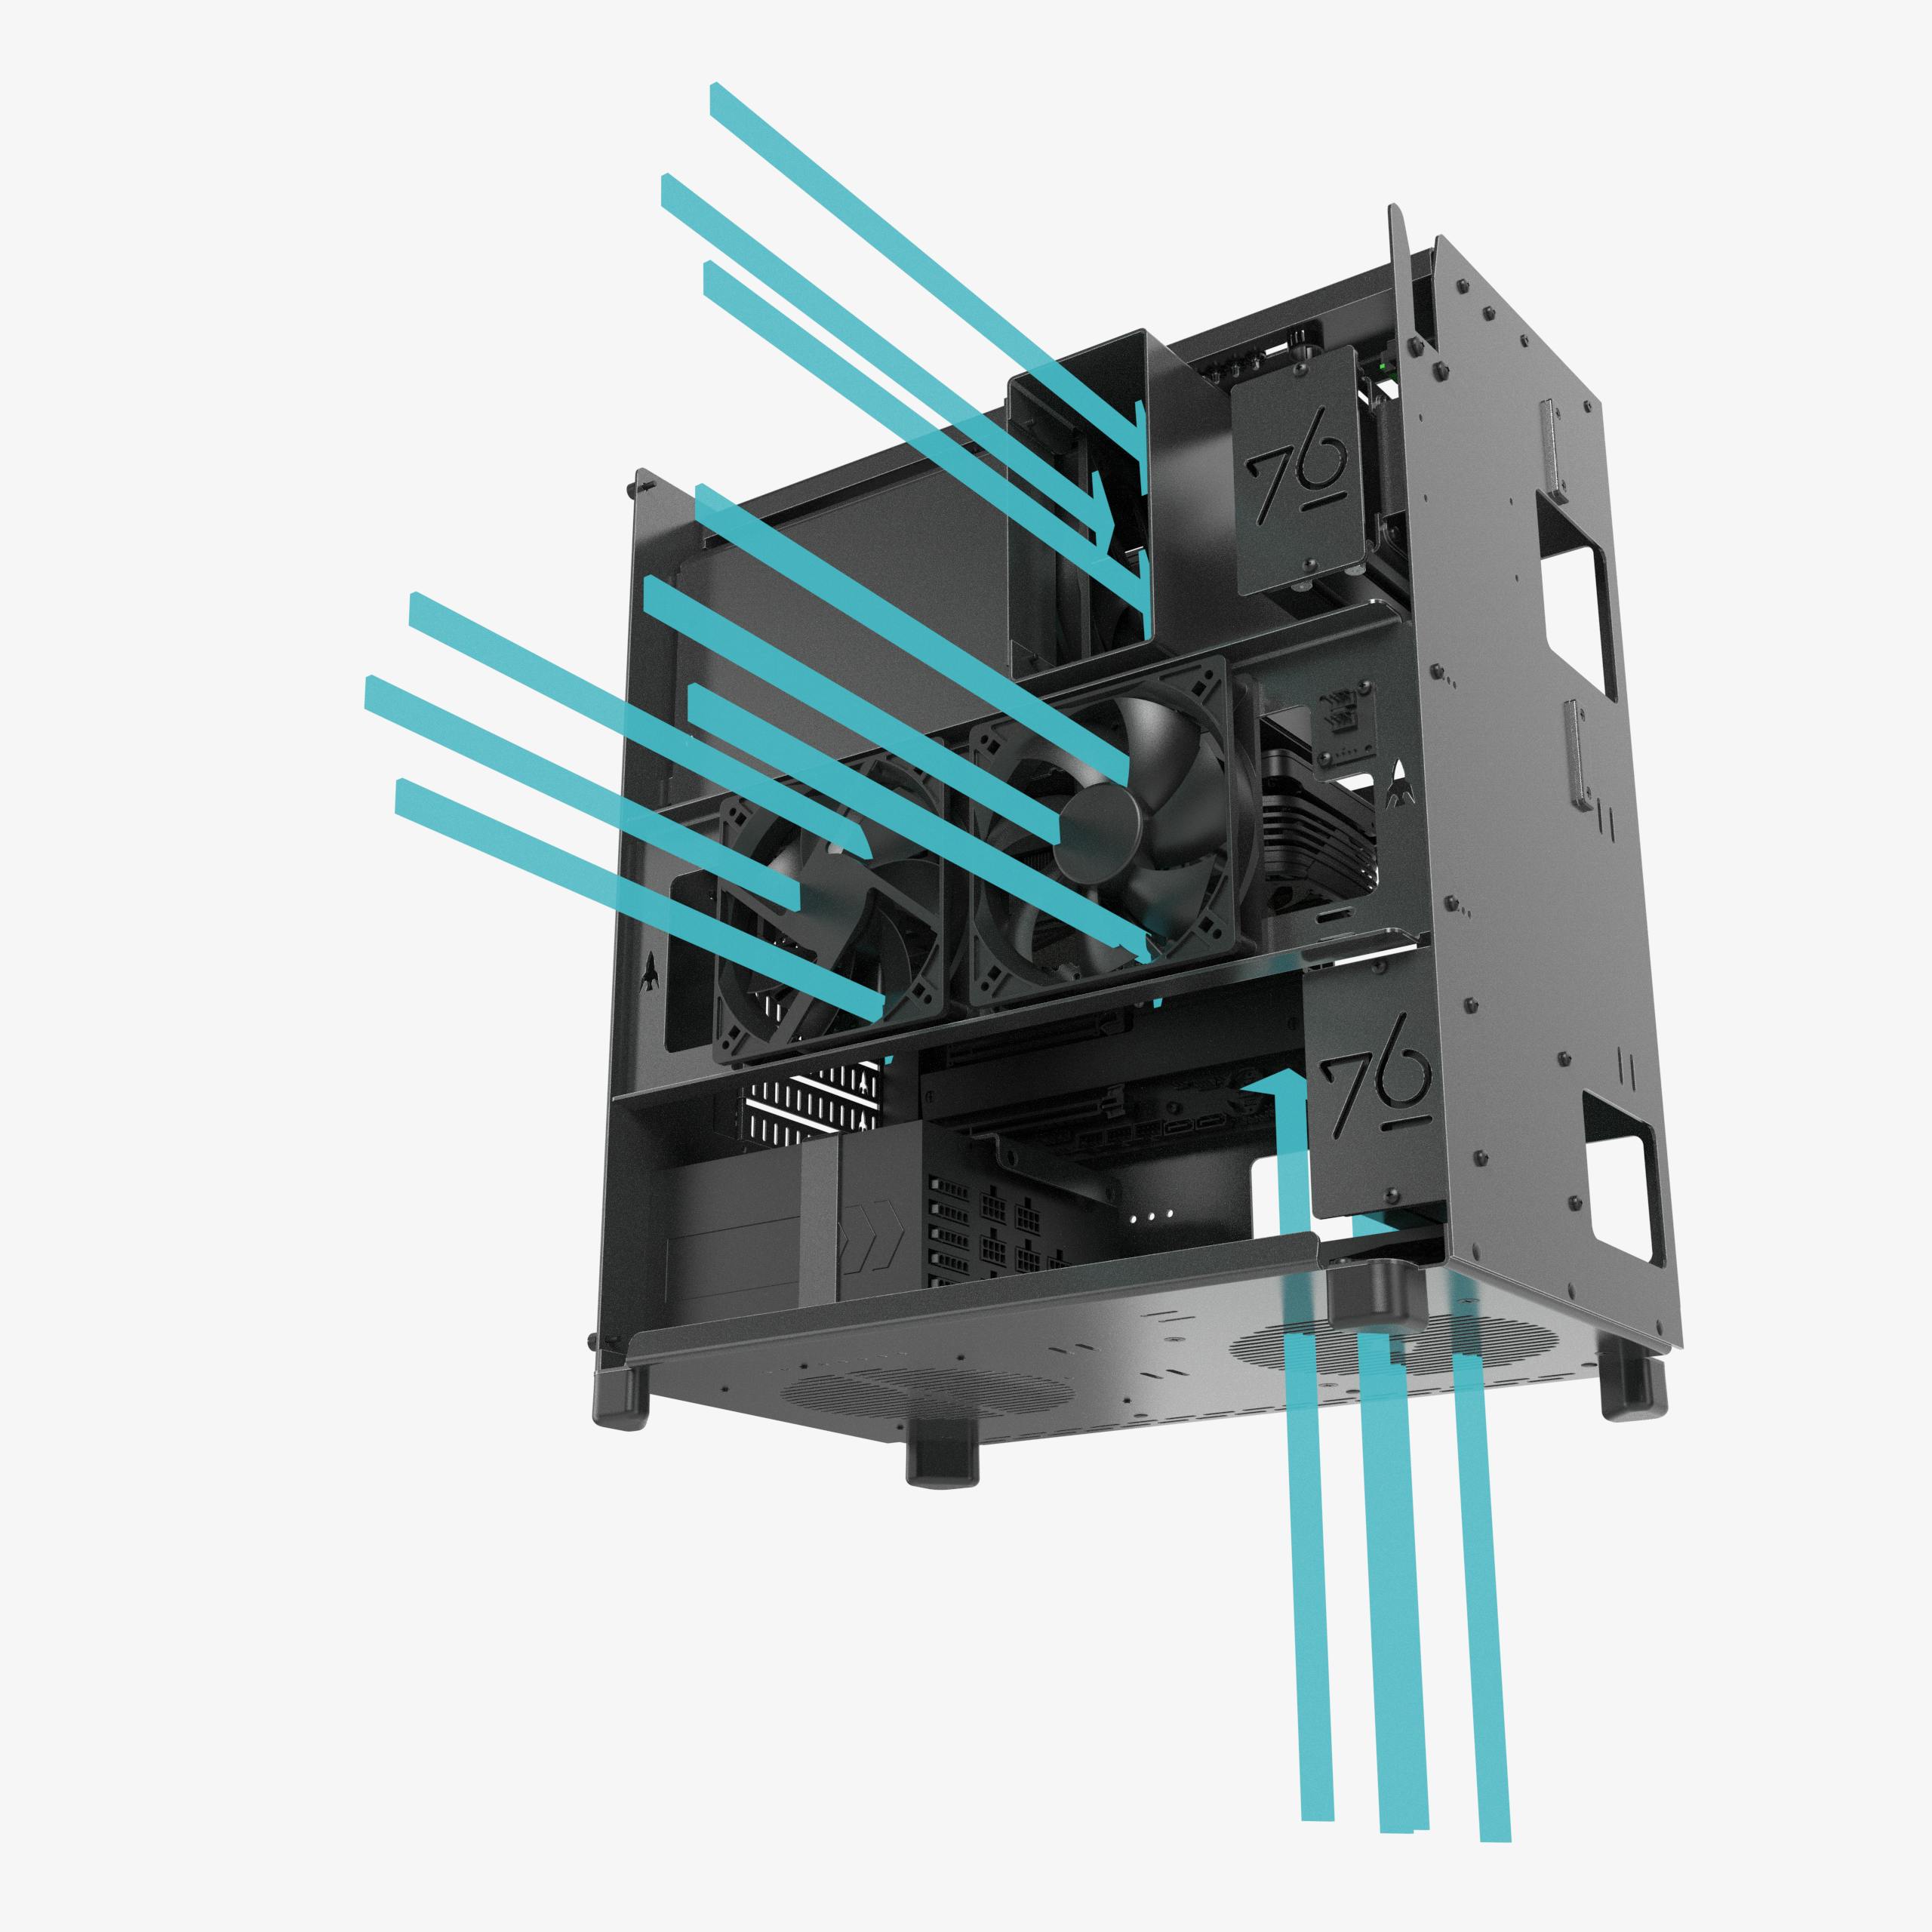 A gif shows how cool air enters the system using side and bottom cool air intake vents, and then is expelled out the exhaust vents. Thelio Major's thermal advantage gives professionals the edge to go further than their competitors.